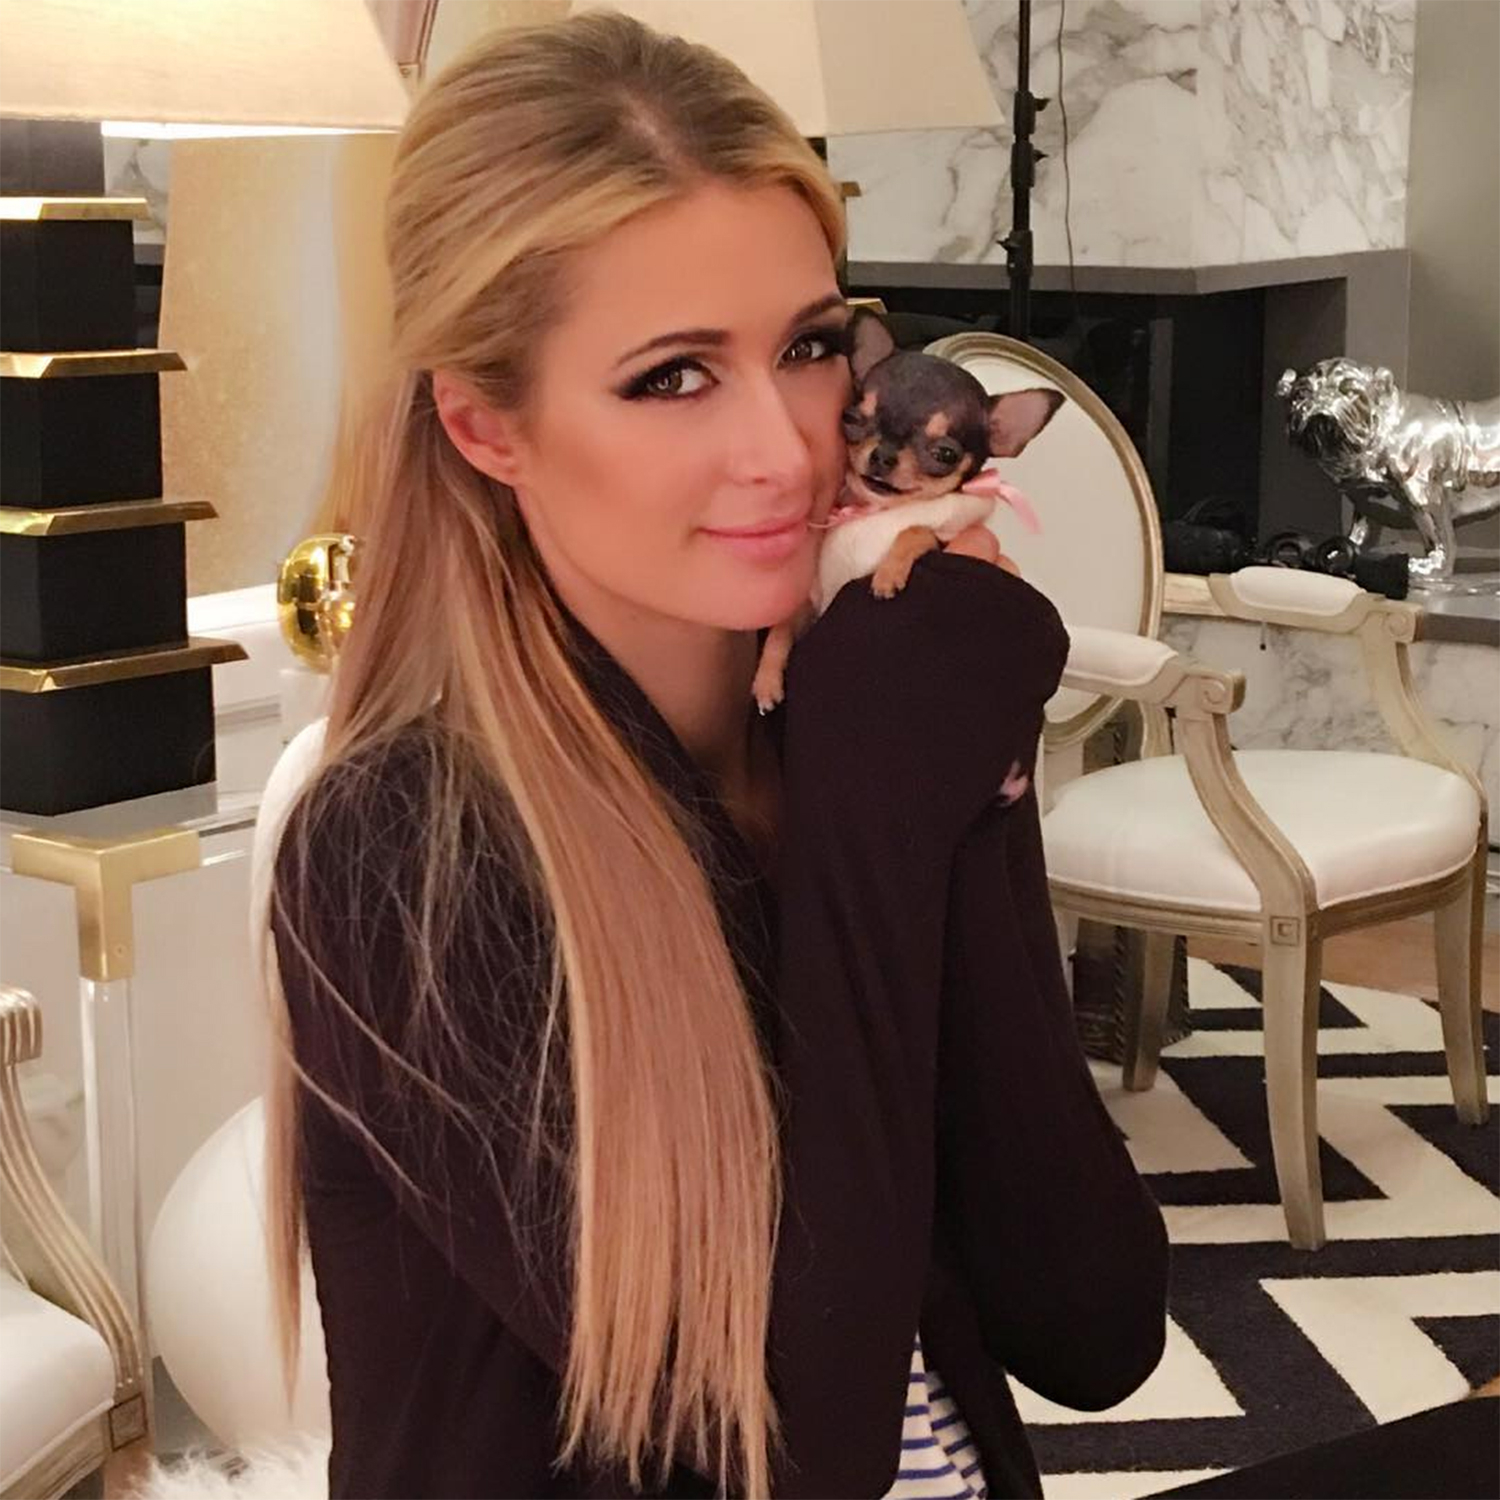 Paris Hilton holding her tiny Chihuahua close to her face